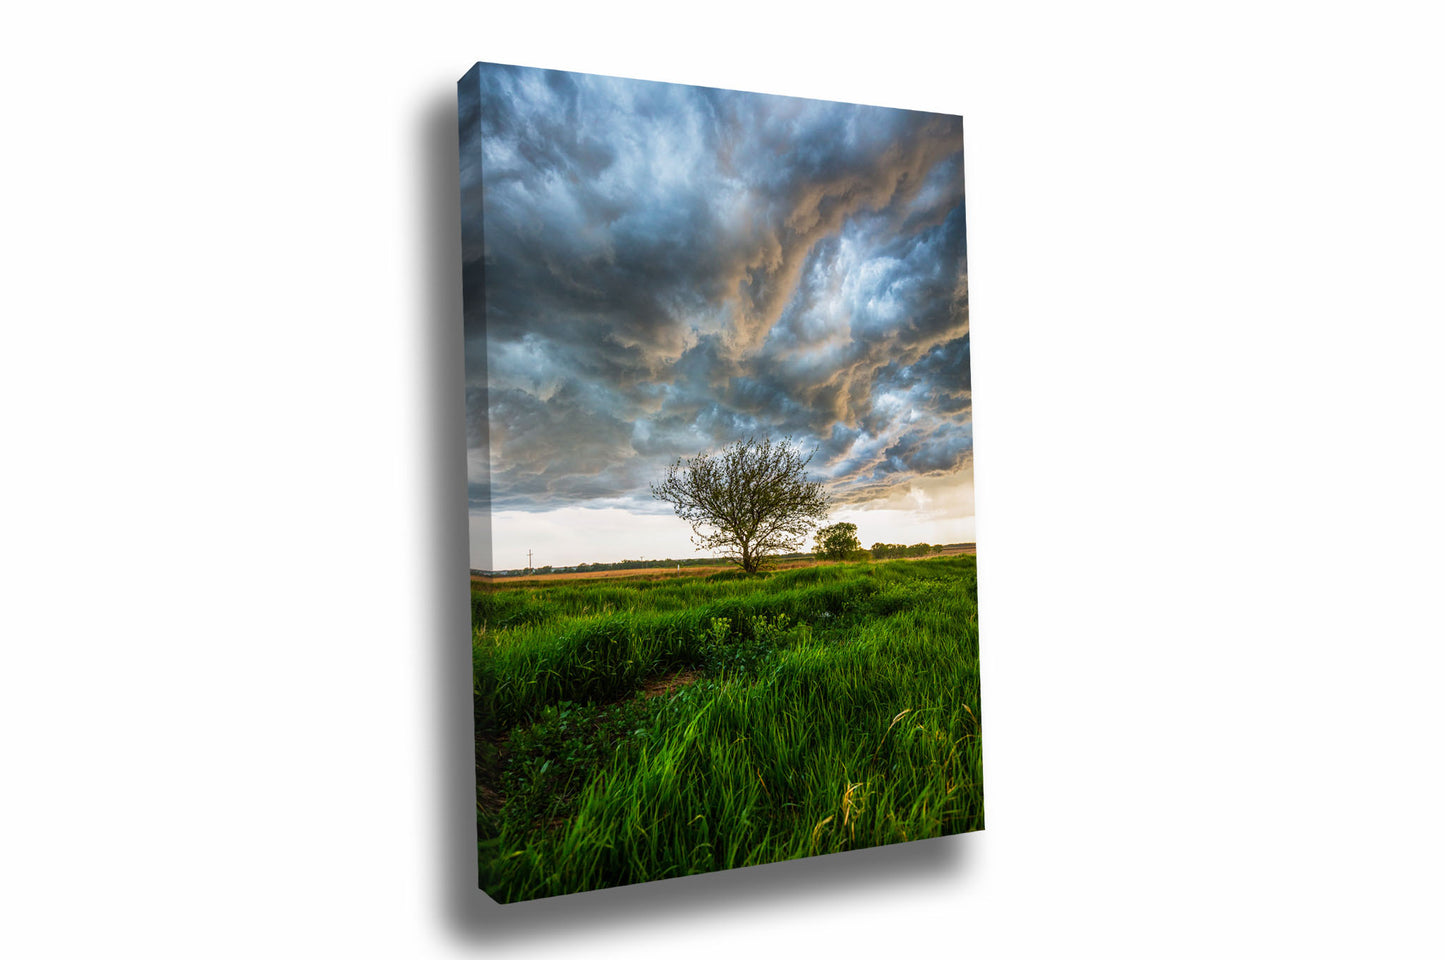 Vertical Great Plains canvas wall art of a lone tree under a stormy sky on a spring day in Kansas by Sean Ramsey of Southern Plains Photography.